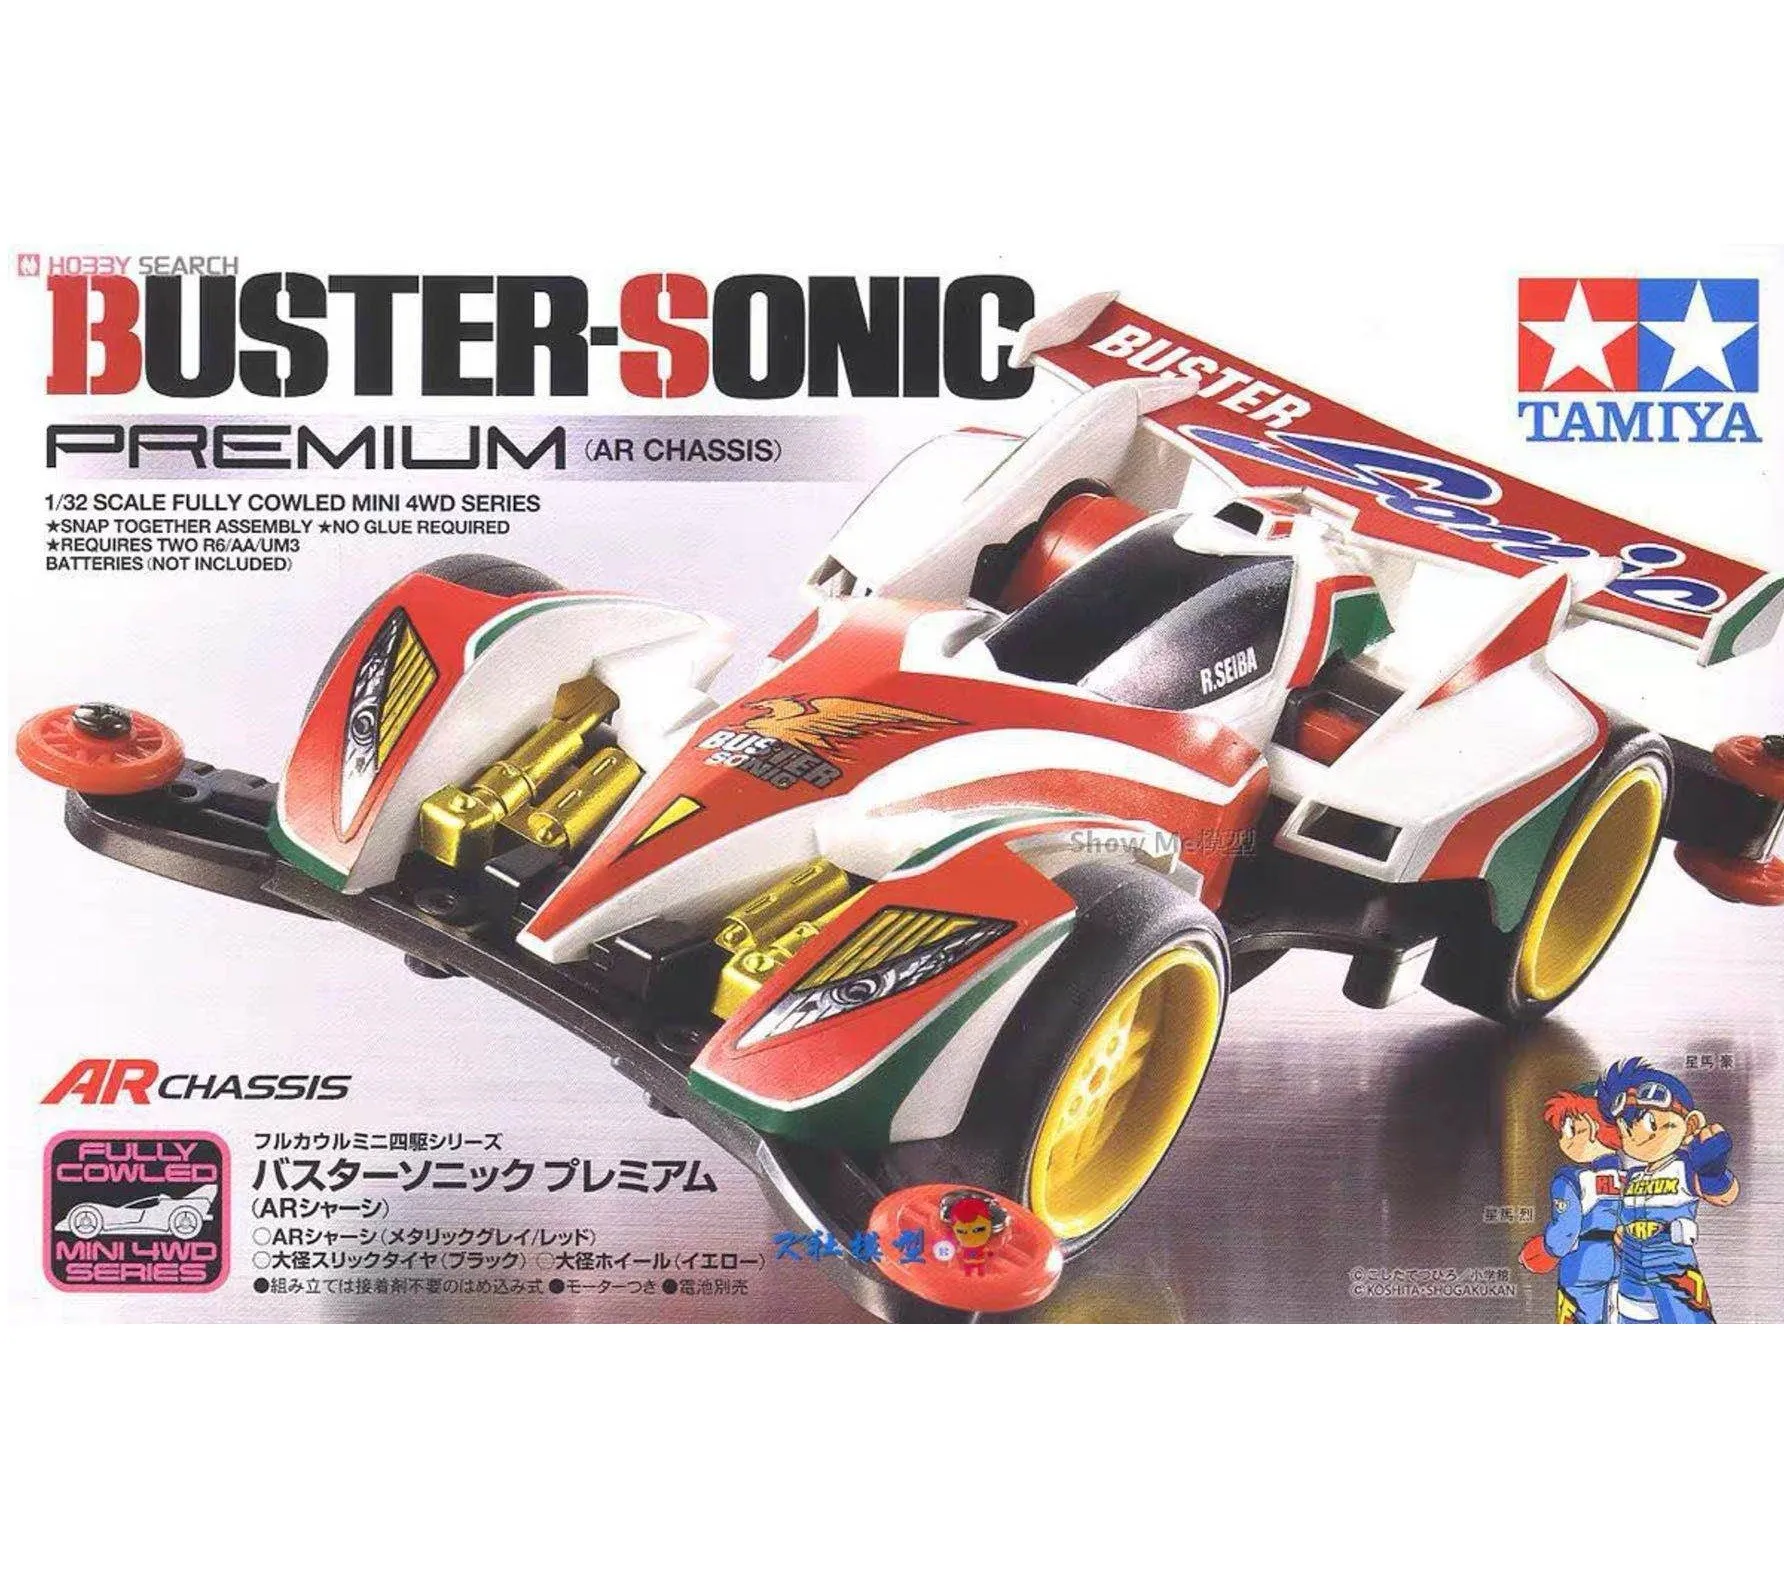 

Tamiya 1/32 Mini 4wd 19445 AR Chassis BUSTER SONIC Anime Action Figure Assemble Model Children's Toys Birthday Gift